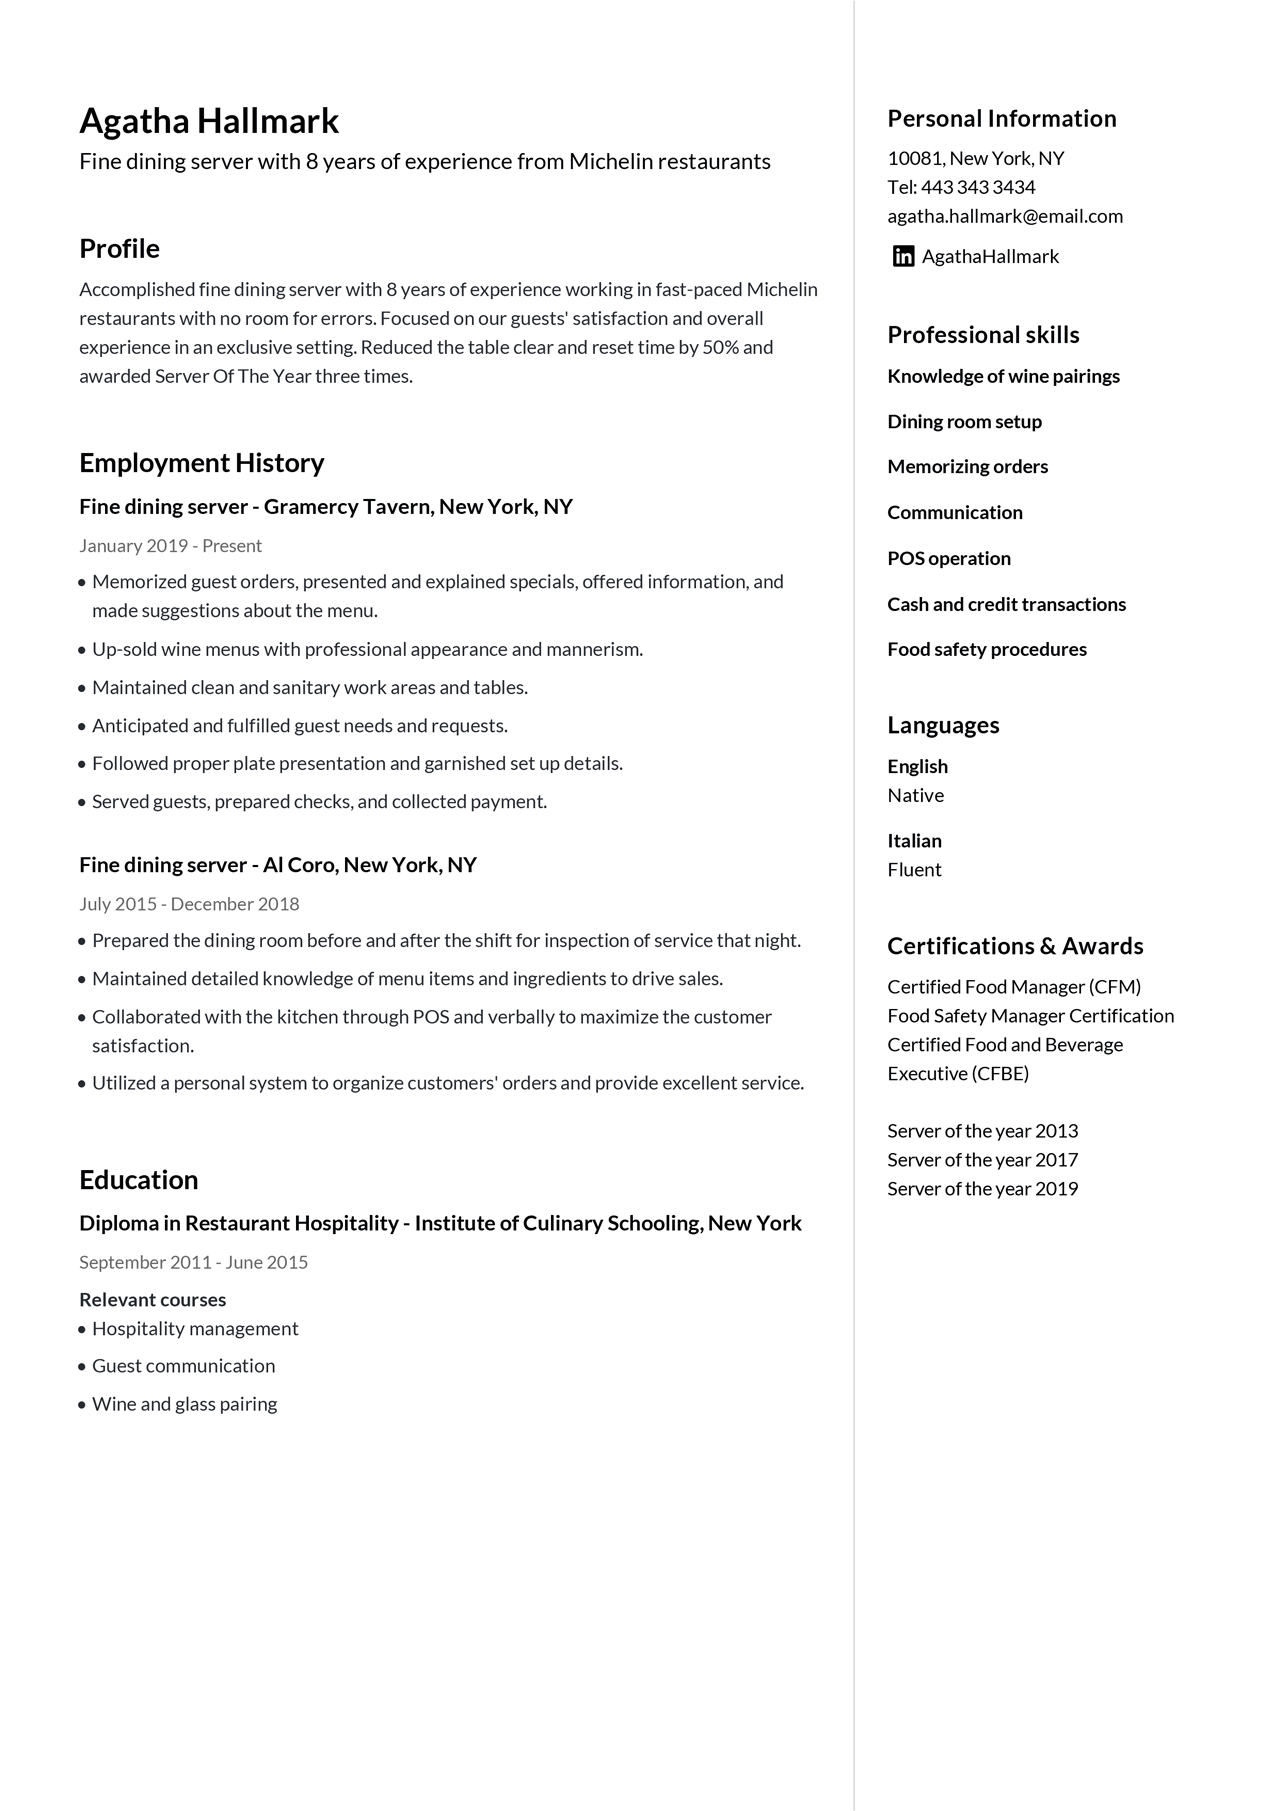 Fine dining resume example